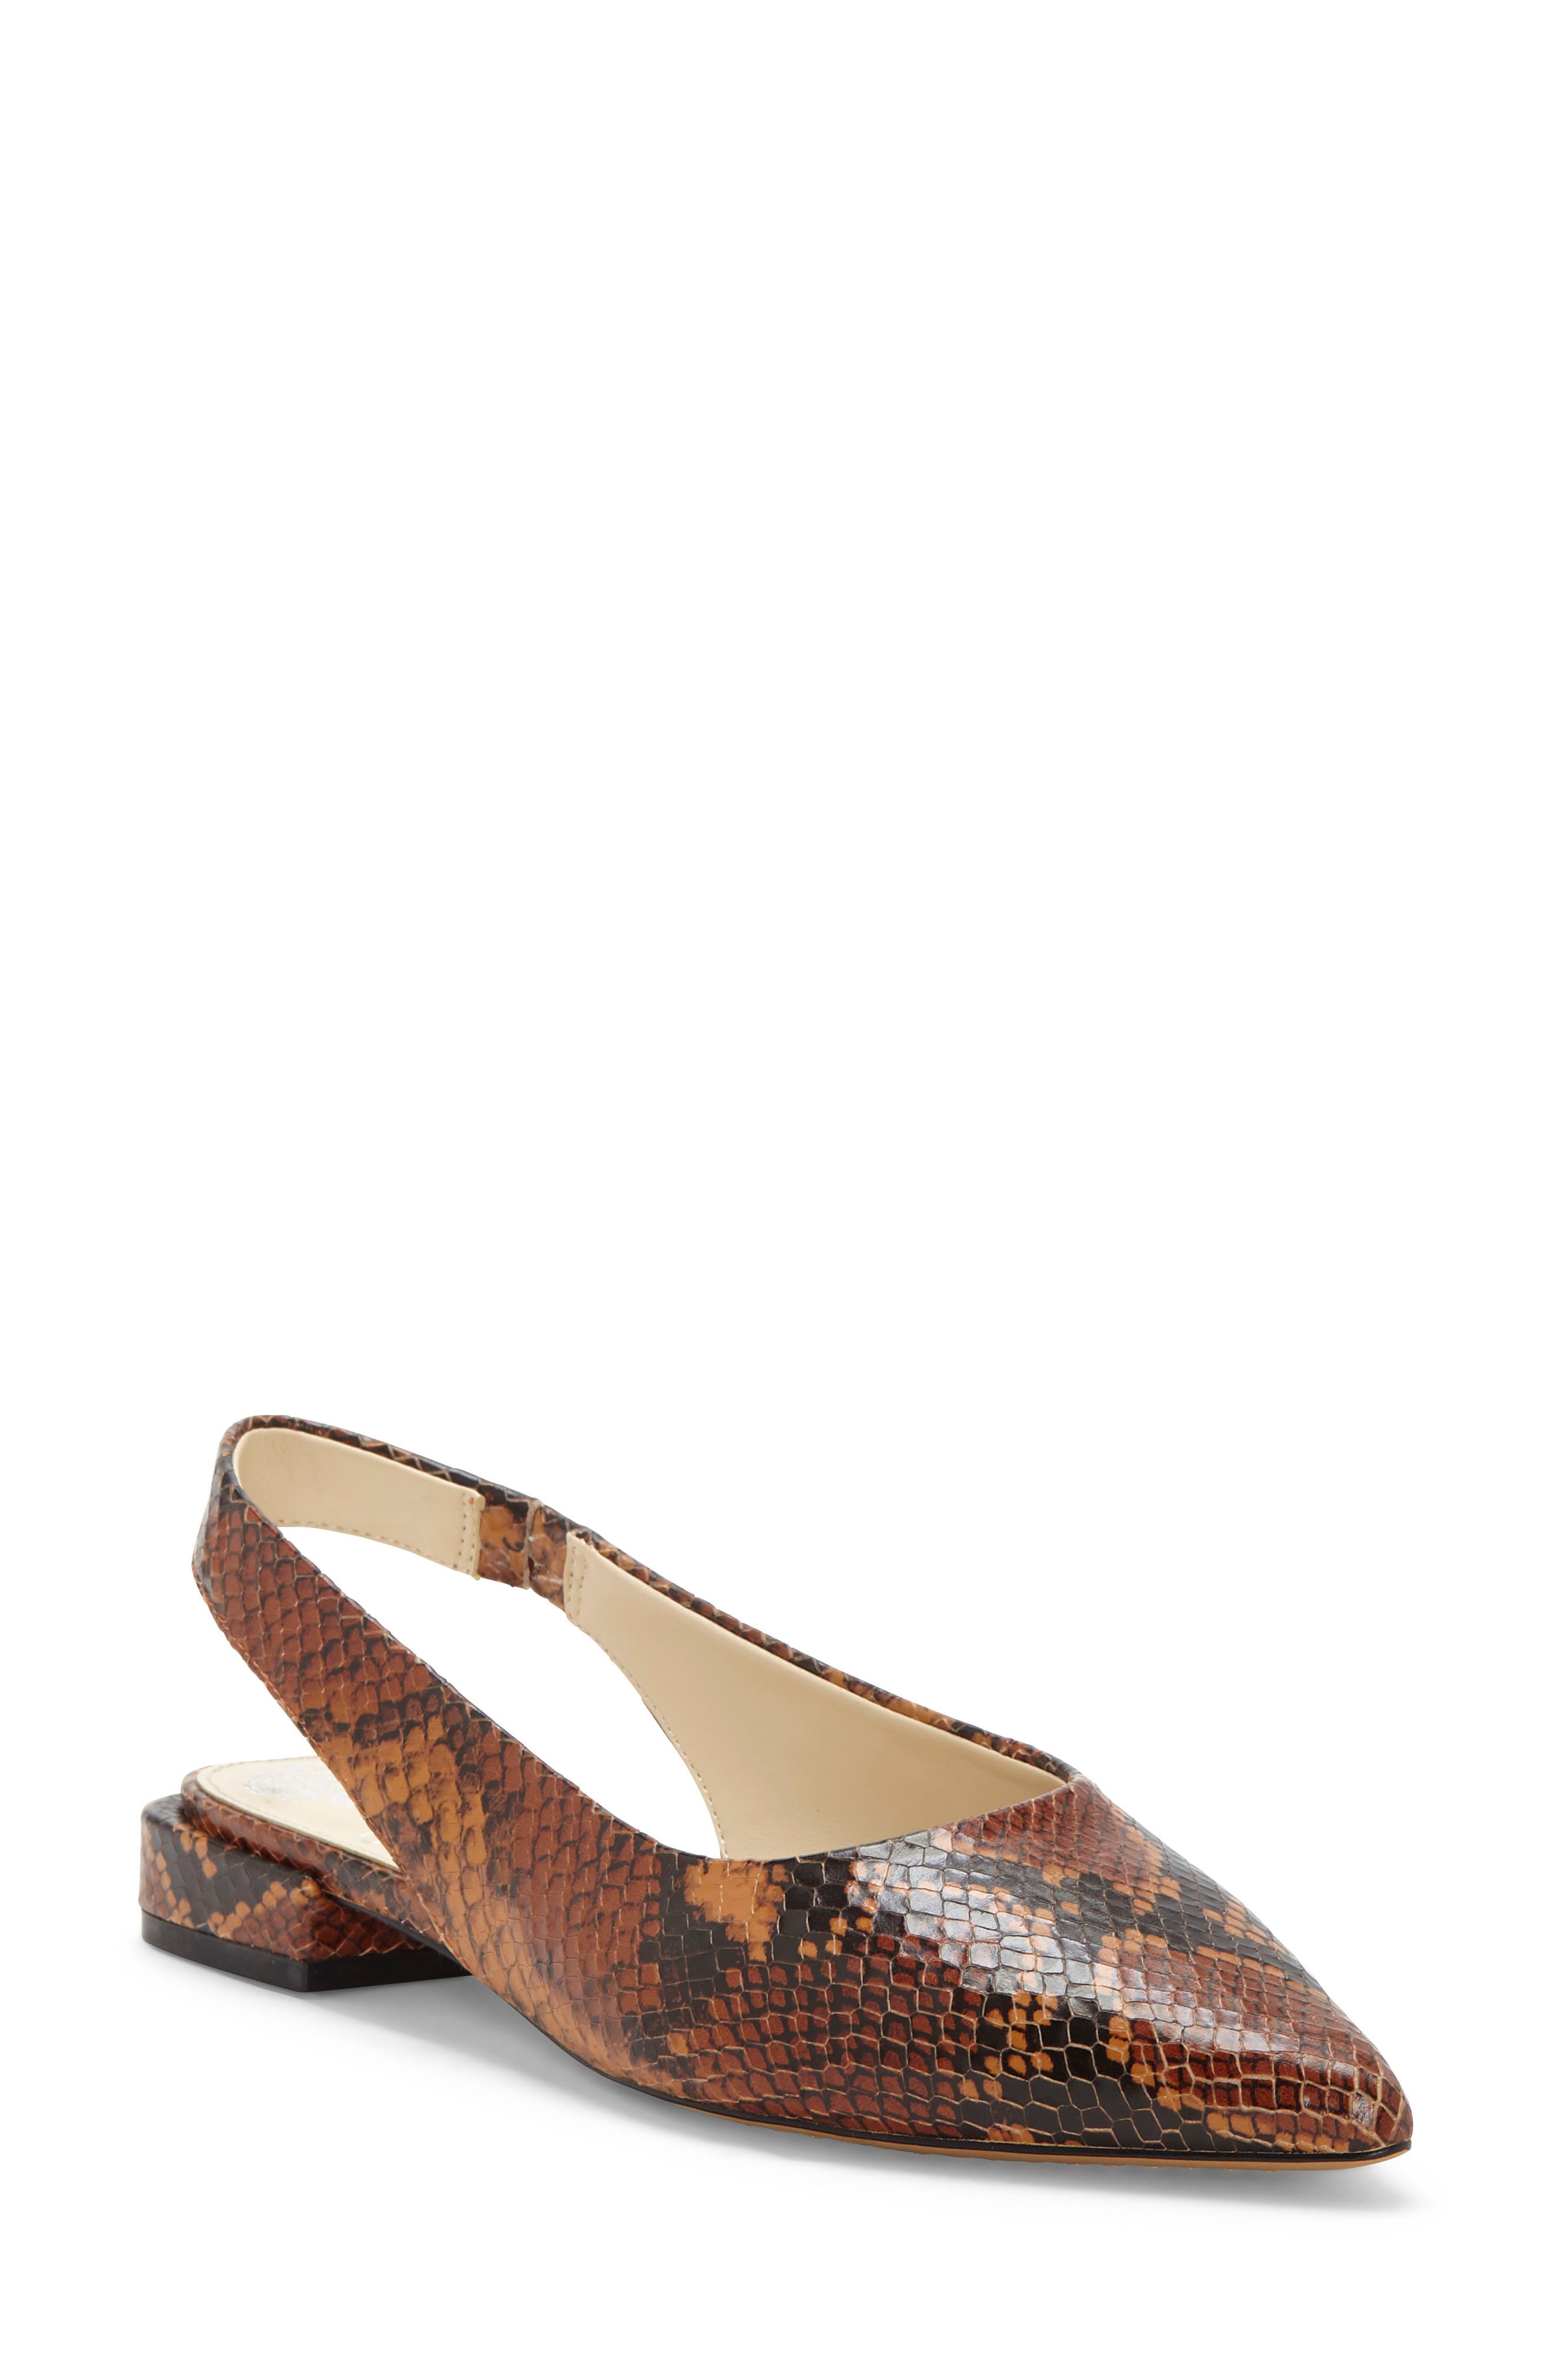 UPC 192151618859 product image for Women's Vince Camuto Chachen Slingback Flat, Size 10 M - Brown | upcitemdb.com